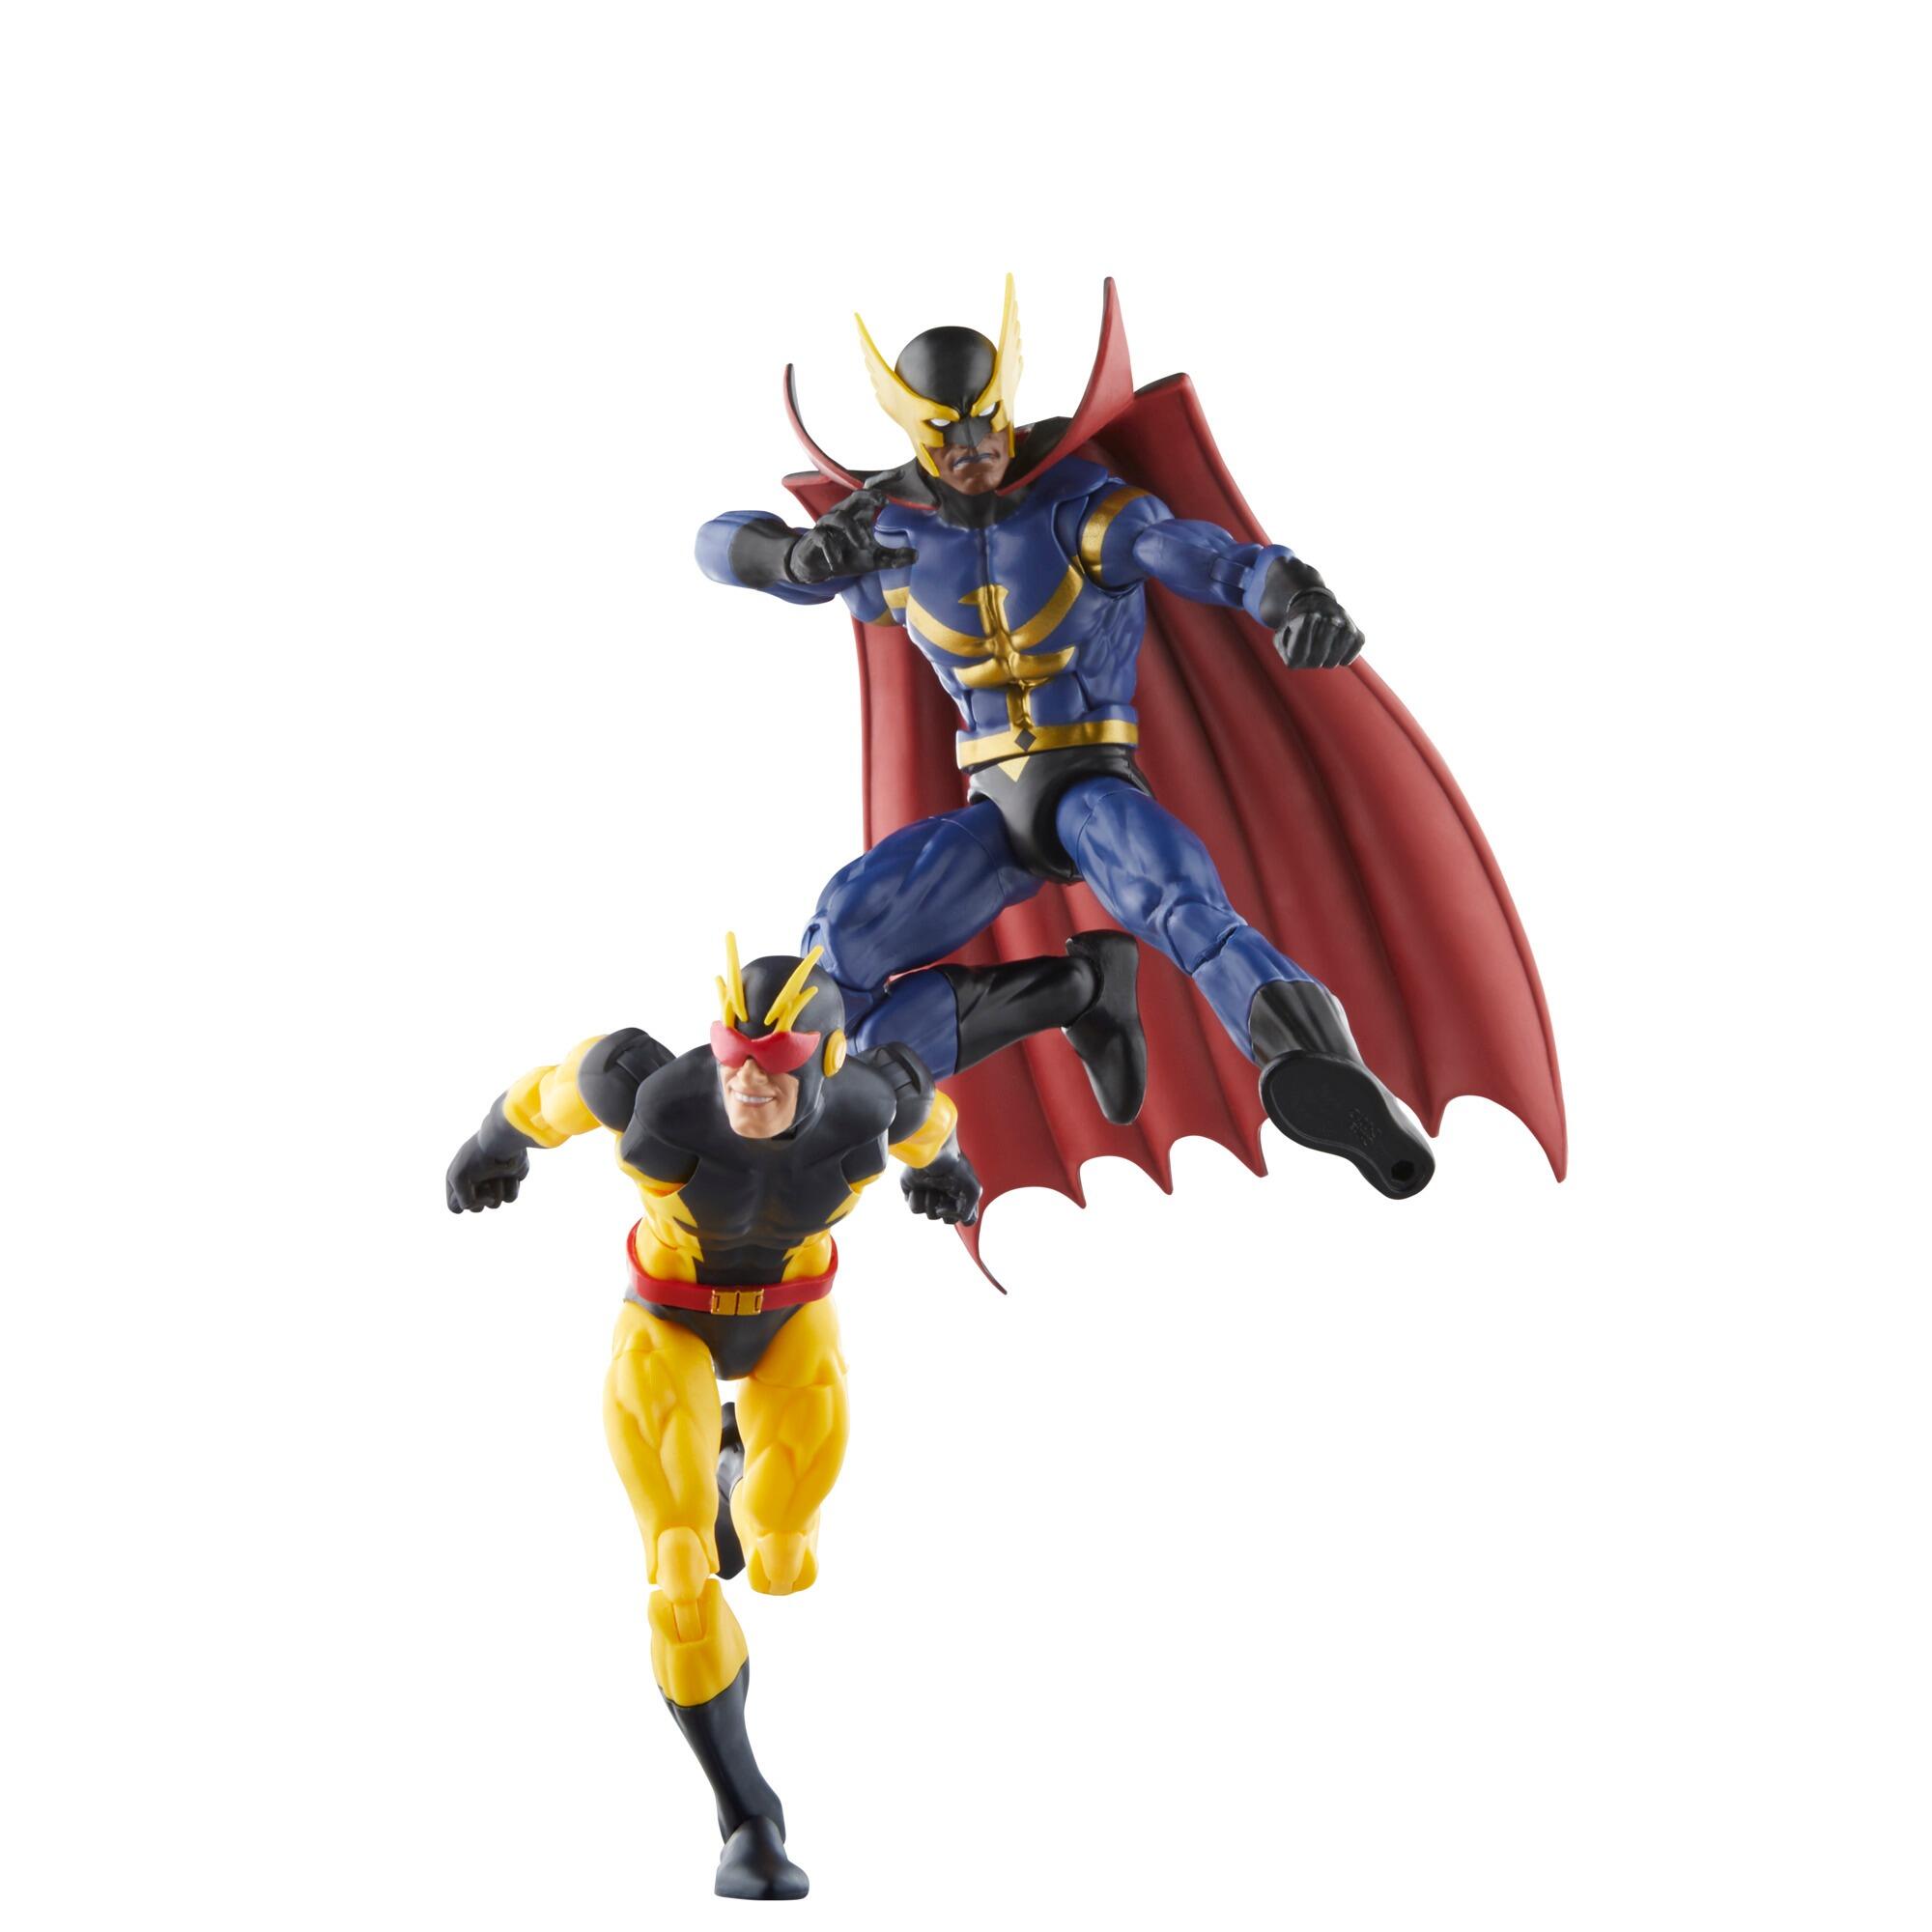 Marvel Legends Series 6-Inch Scale Action Figure 2-Pack - Marvel's